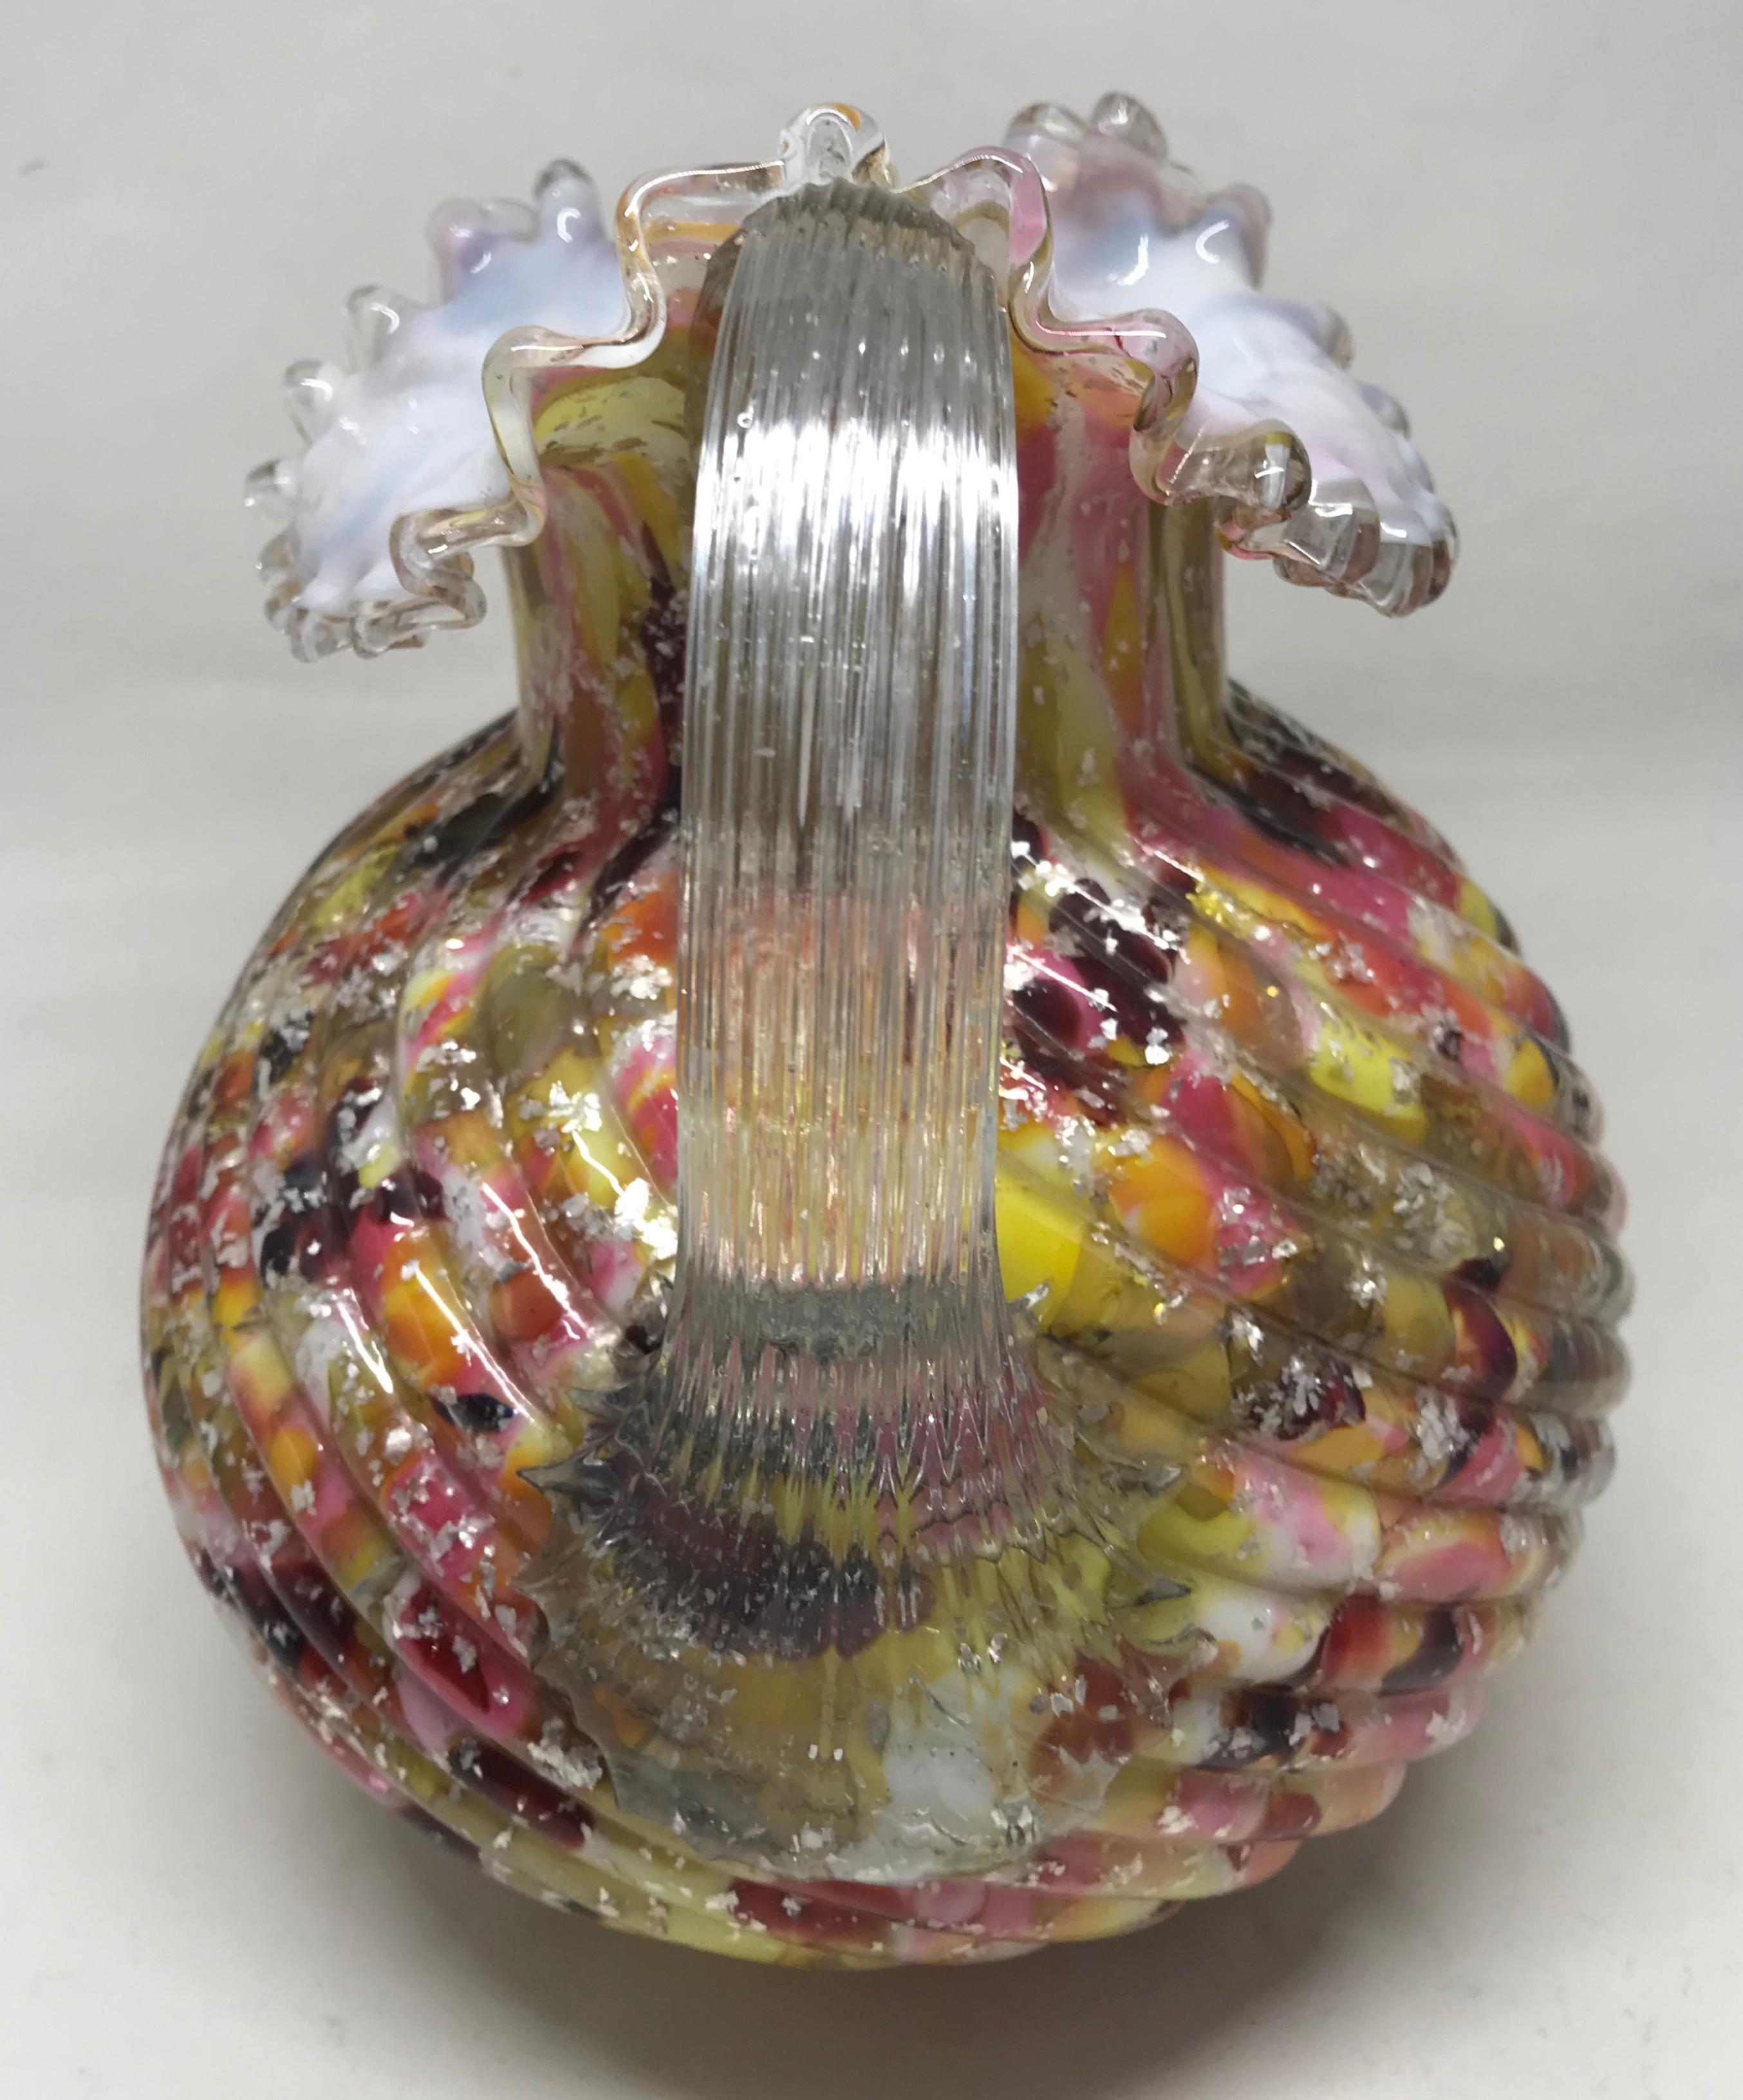 Multicolored glass pitcher. American hand blown pink, yellow, amber and silver fused glass design pitcher with ruffled spout and rim and clear glass handle. United States, circa 1900.
Dimensions: Handle to spout 7